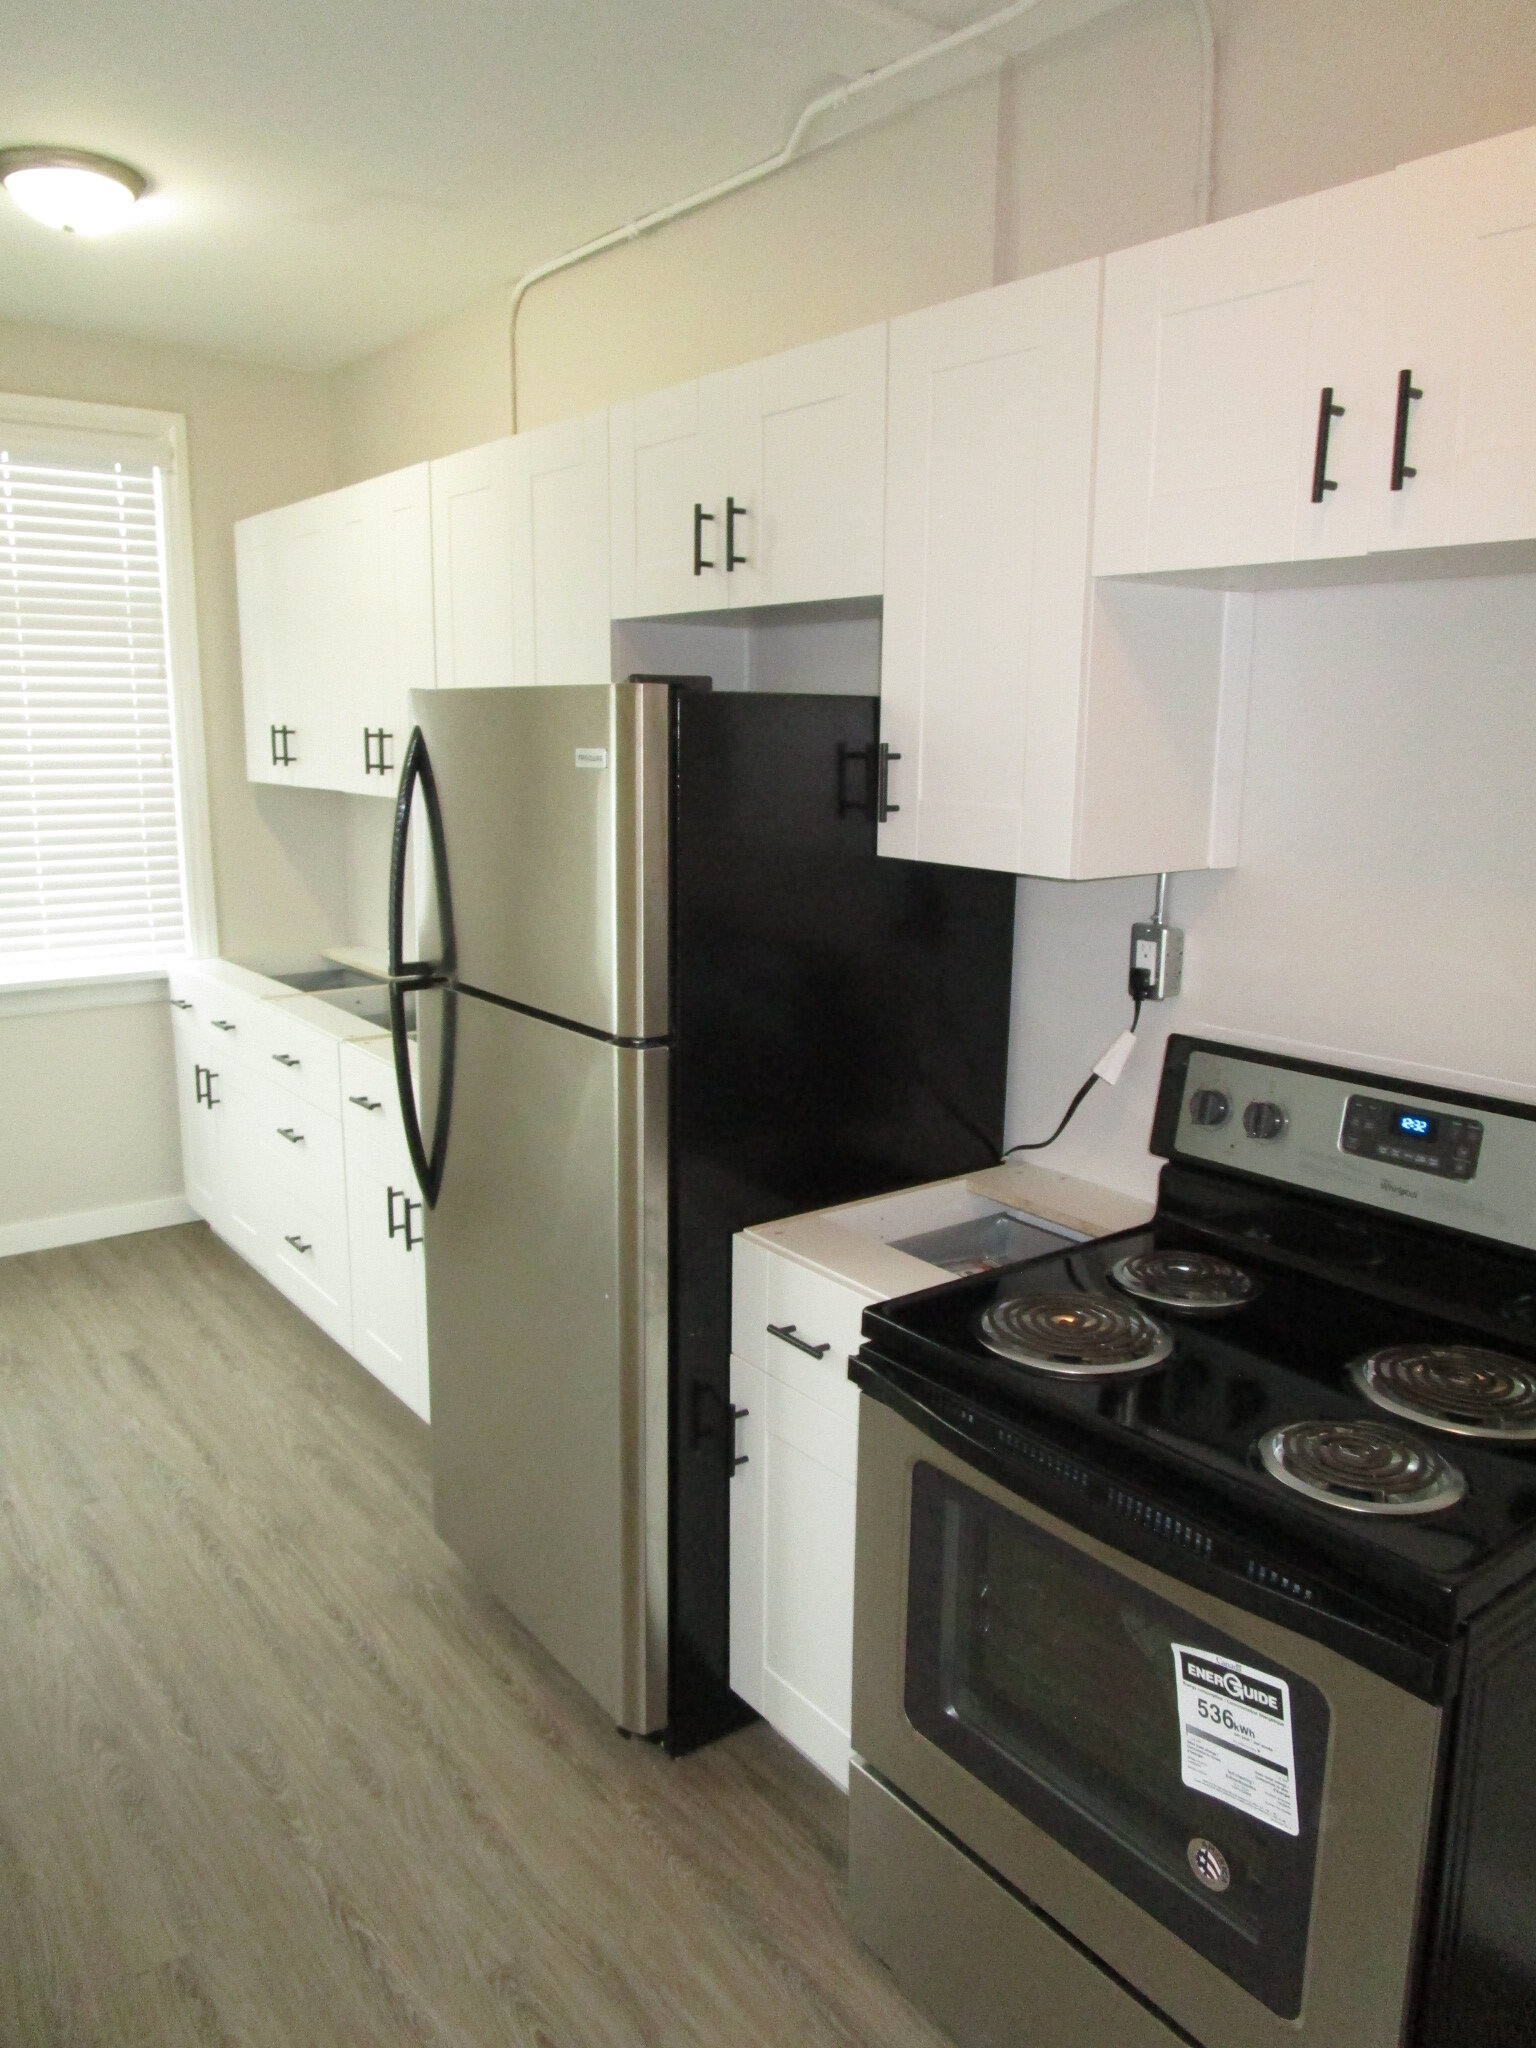 1205 3rd Ave, Prince George - New Kitchen.jpg